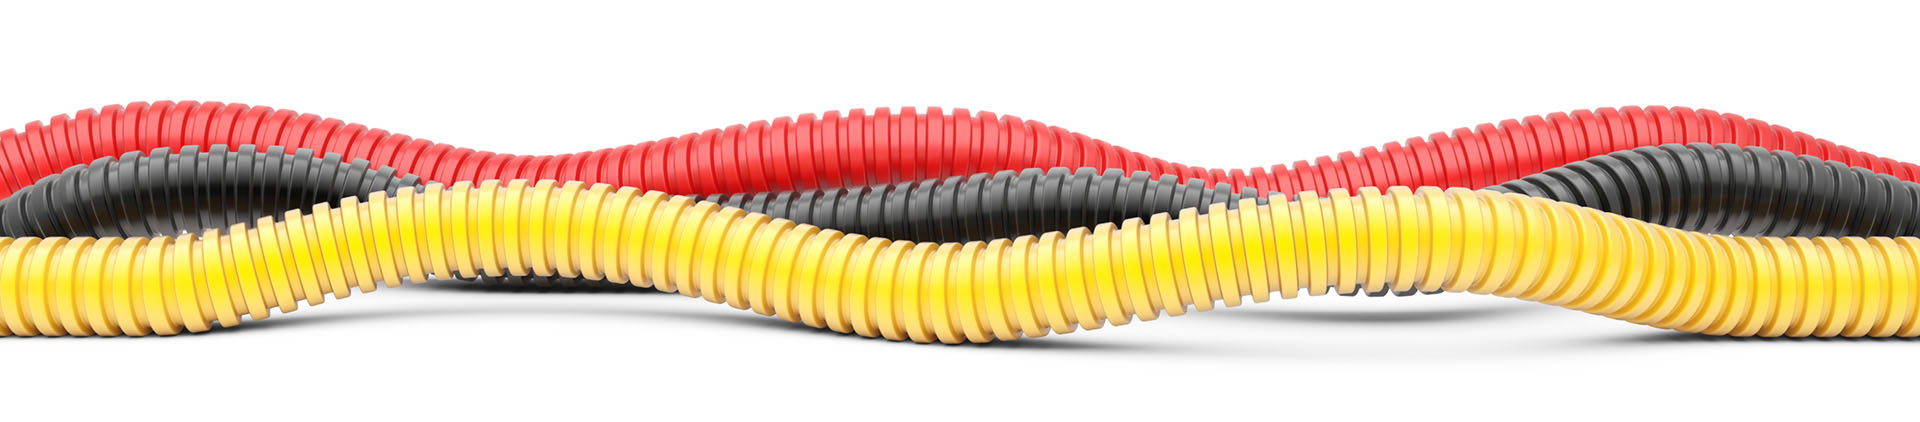 Red, black, yellow colored Electrical Non-metallic Tubing for installation of electrical cable.